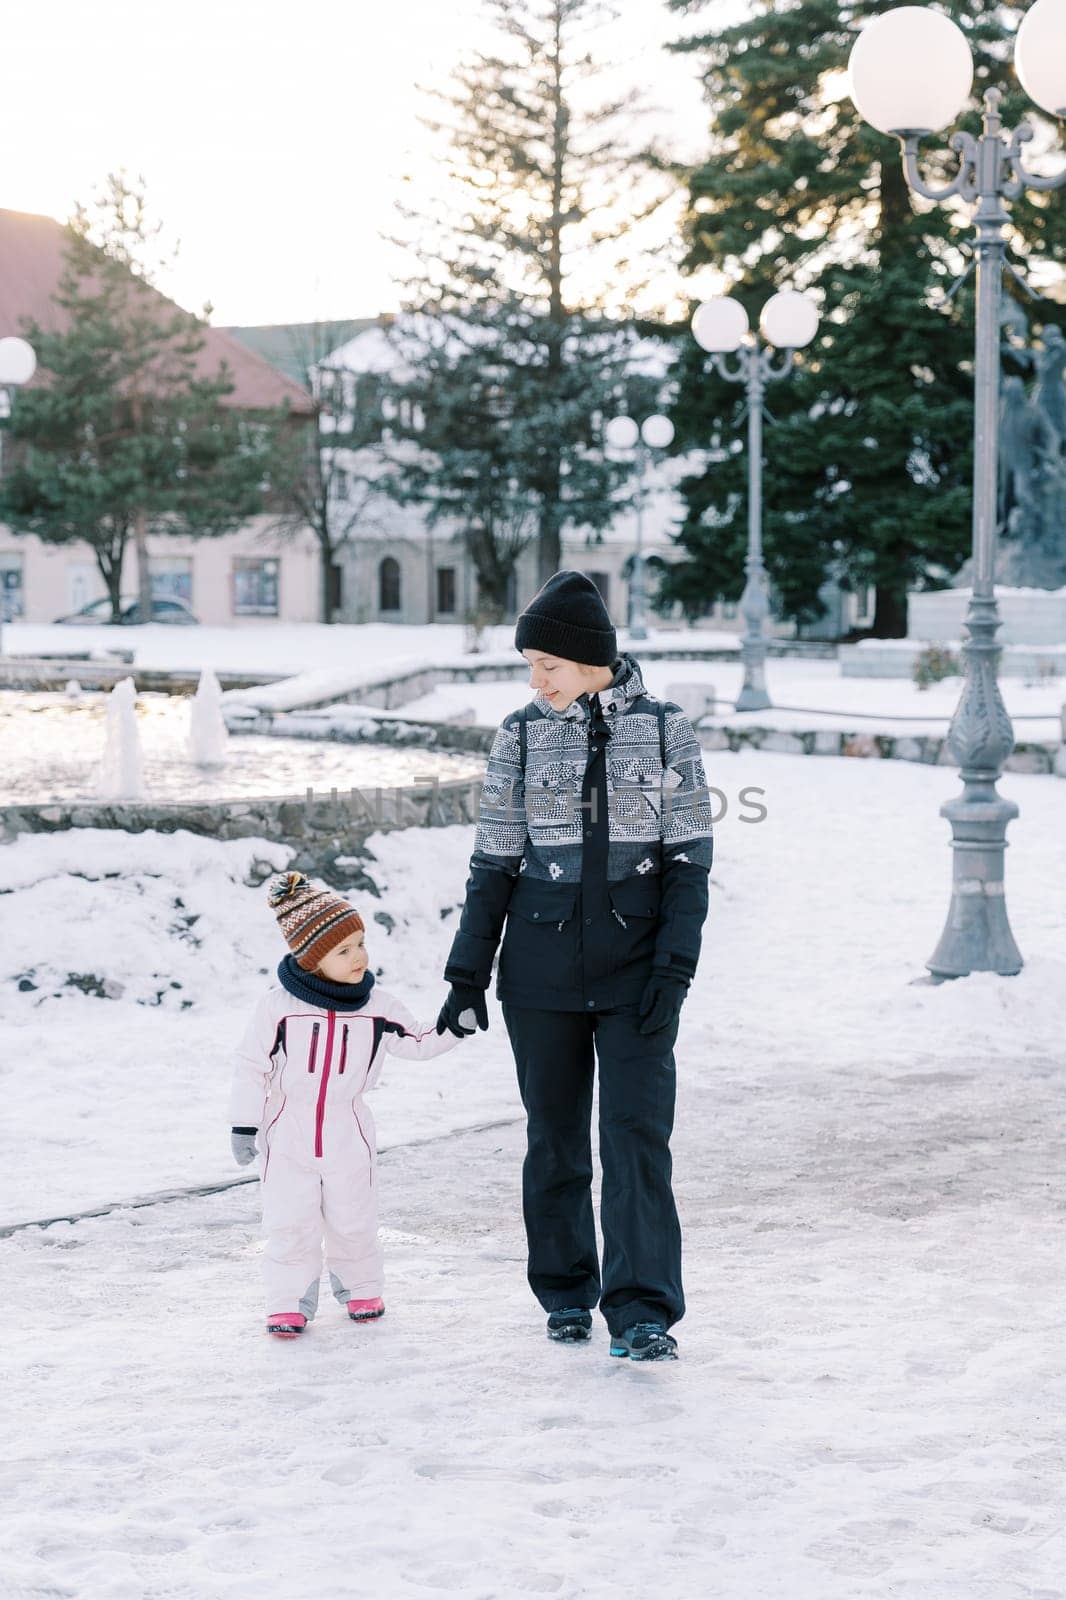 Mom and little girl walk holding hands along a snowy alley by Nadtochiy